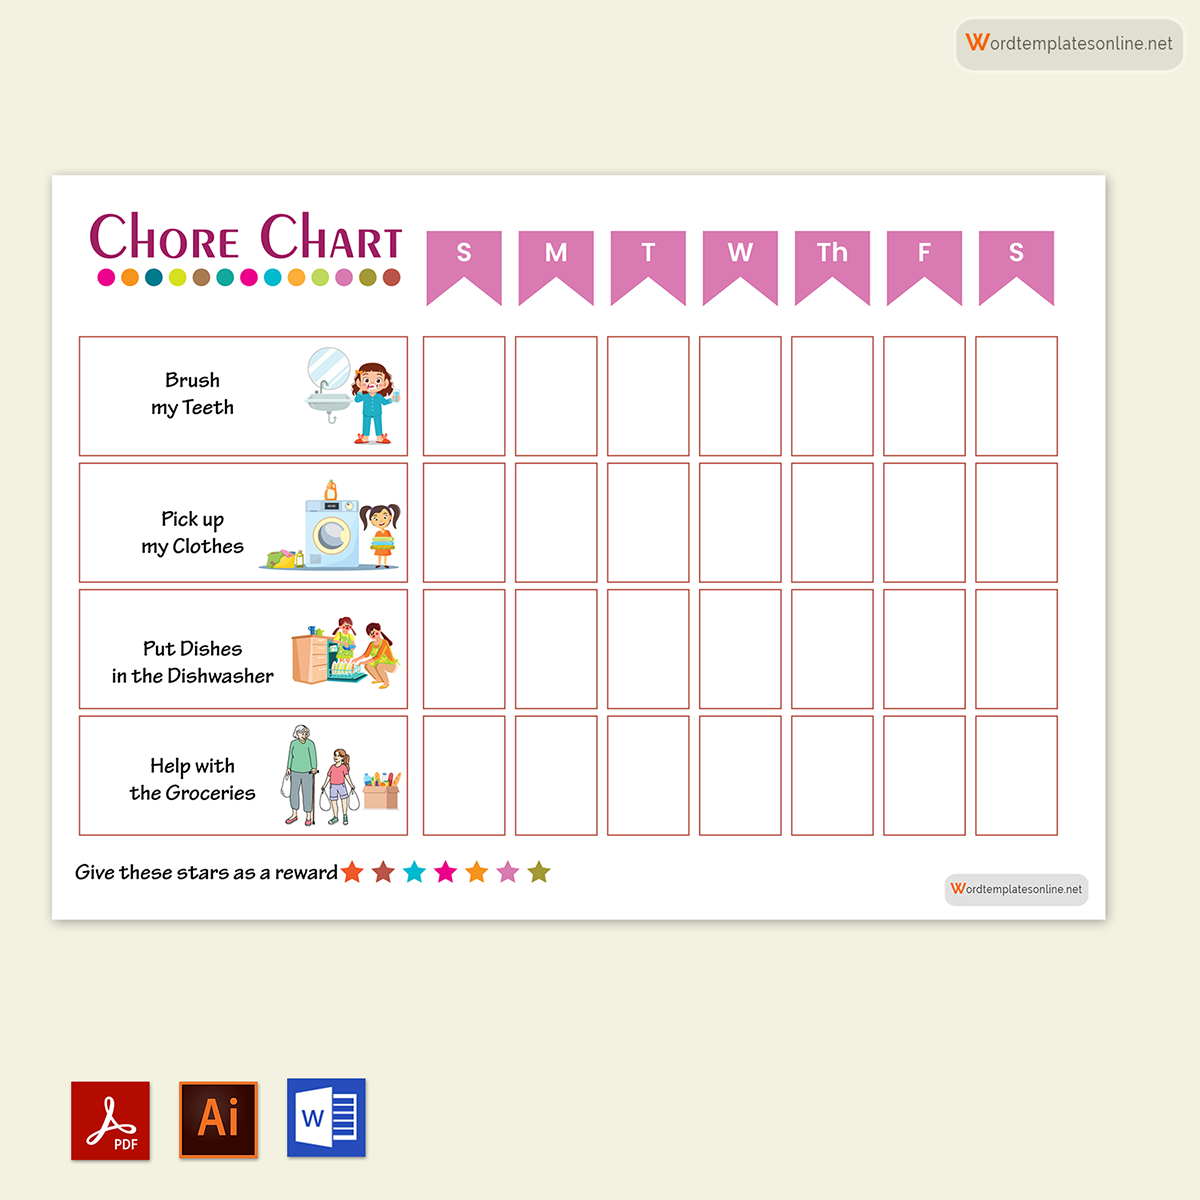 Sample Professional Chore Coloring Chart for Kids Sample 02 for Word and Adobe Format